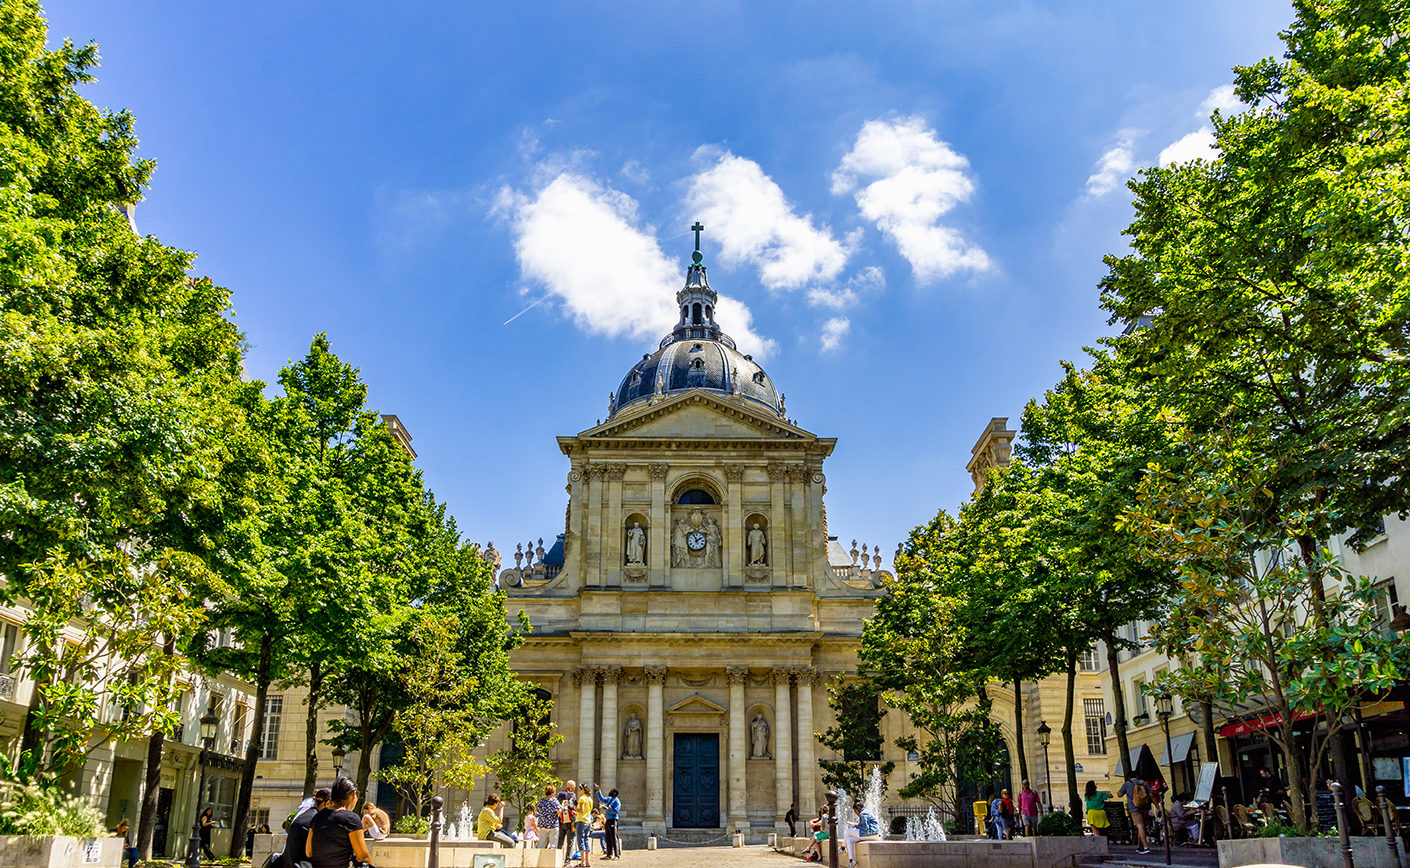 PARIS, FRANCE - APRIL 13, 2017: Sorbonne square, Place de la Sorbonne was opened in 1639. It is located in Latin Quarter. View of the Sorbonne Chapel from Sorbonne square. High Resolution Image.